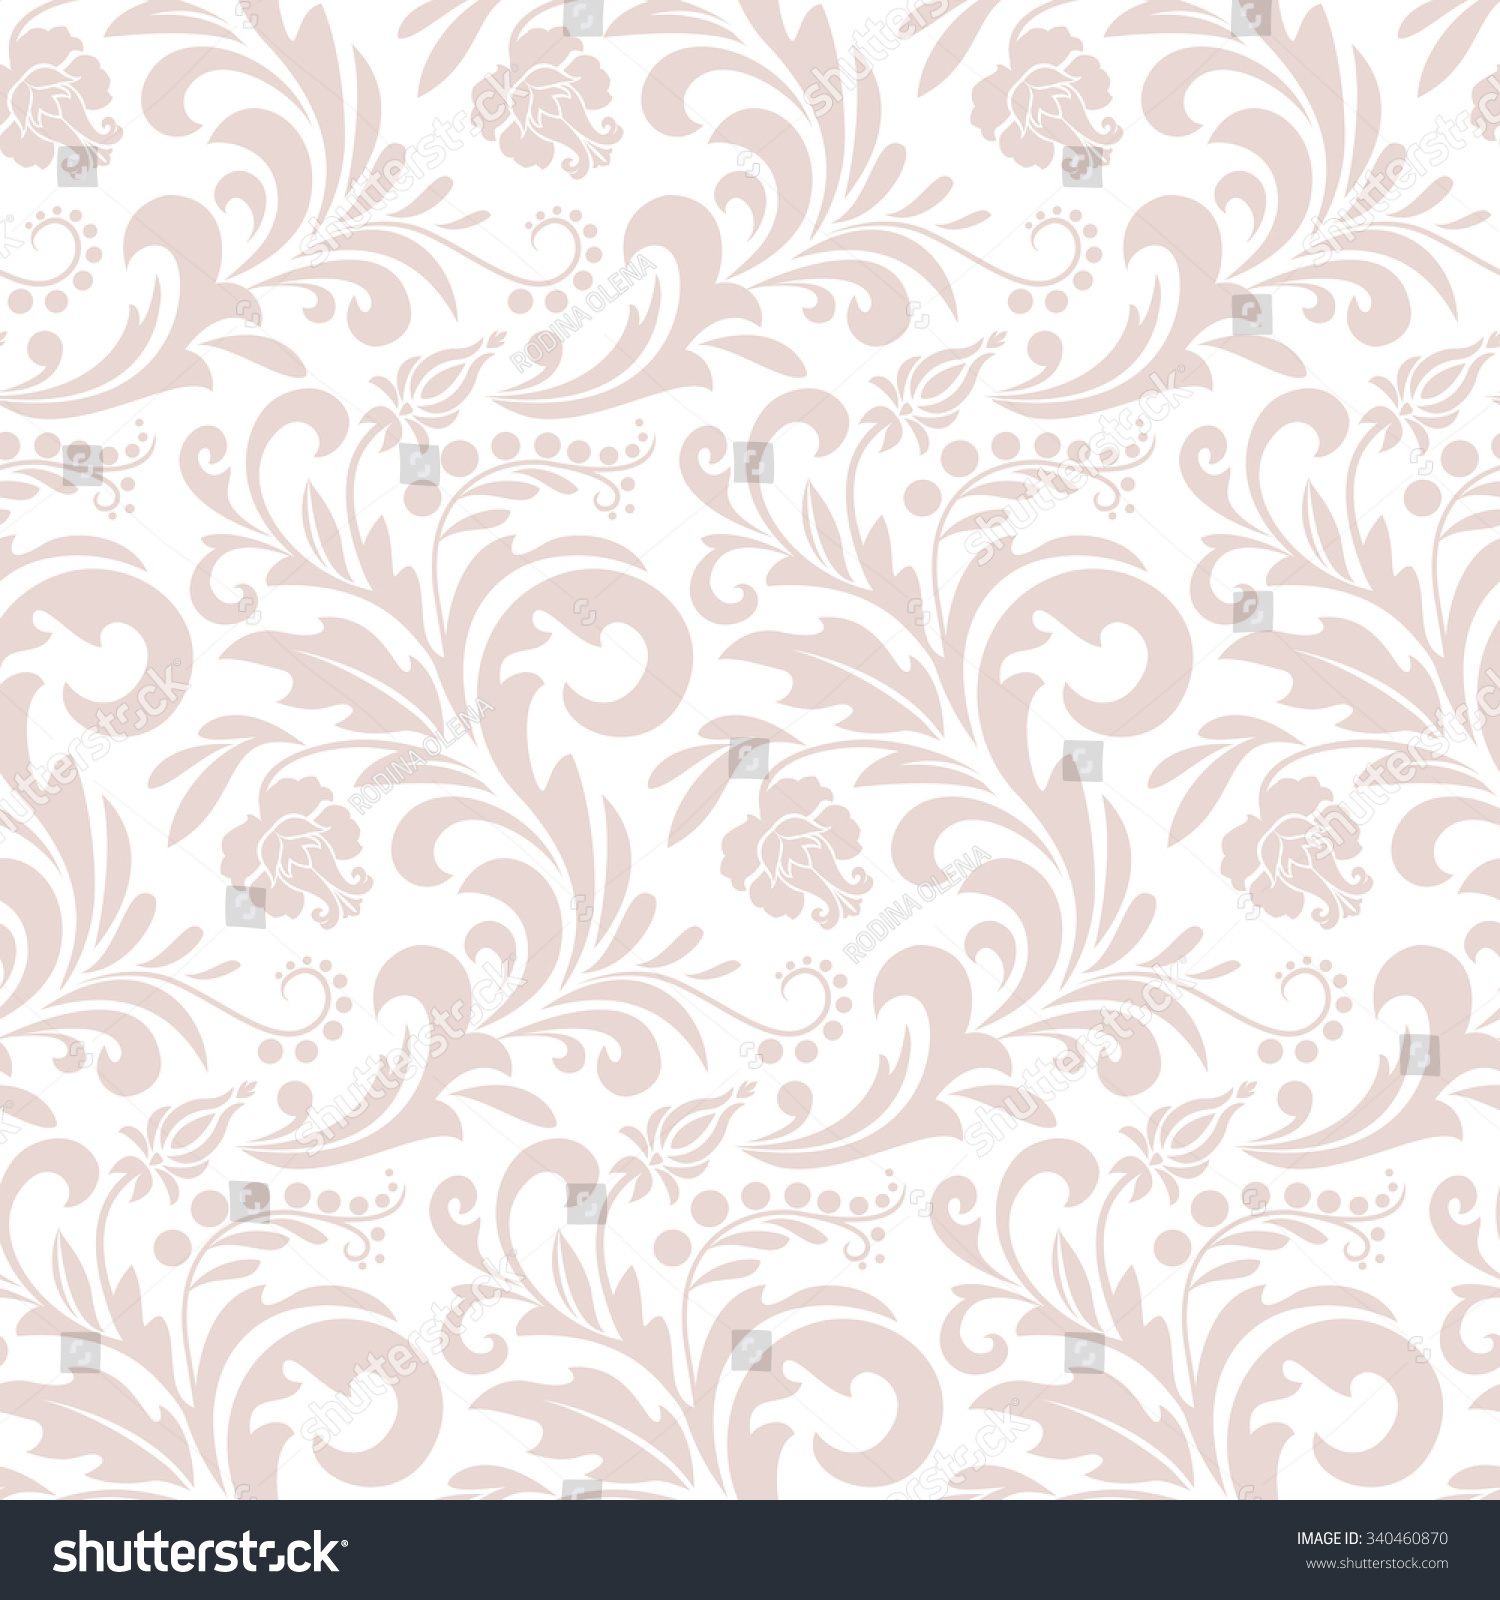 Wallpaper In The Style Of Baroque. A Seamless Vector Background. Pink ...